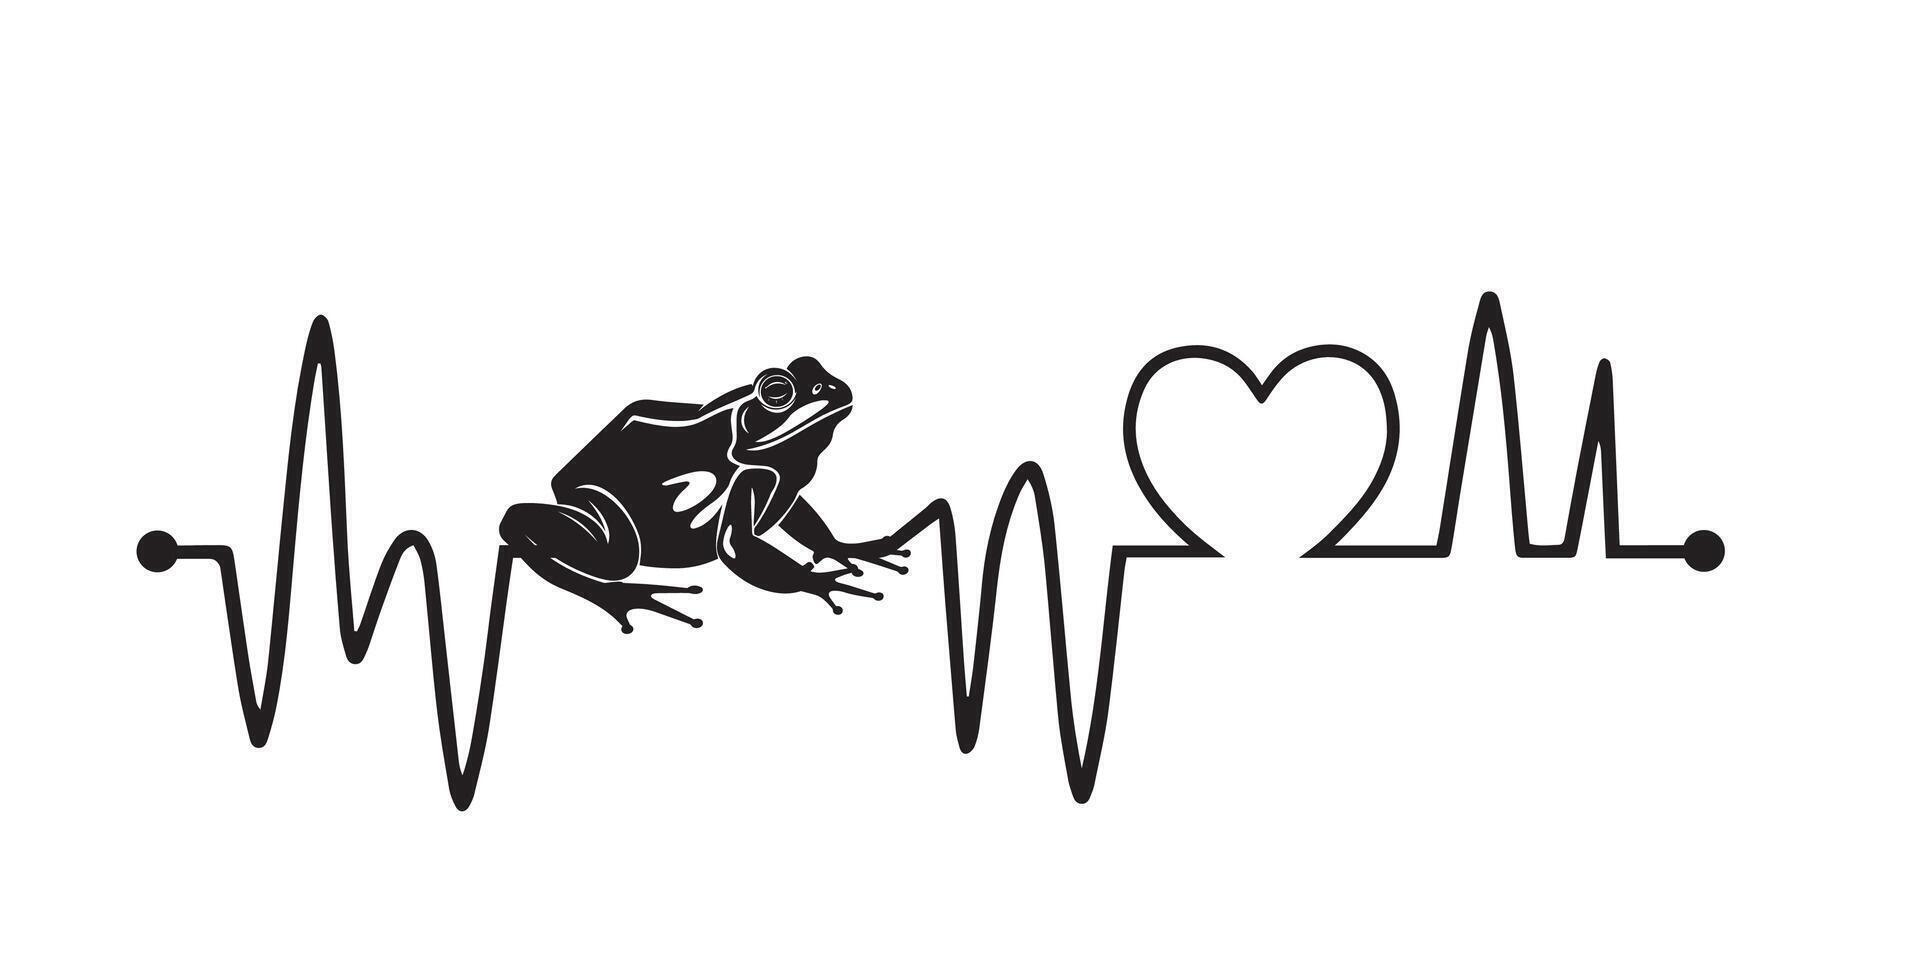 A frog at rest Heartbeat wave illustration vector